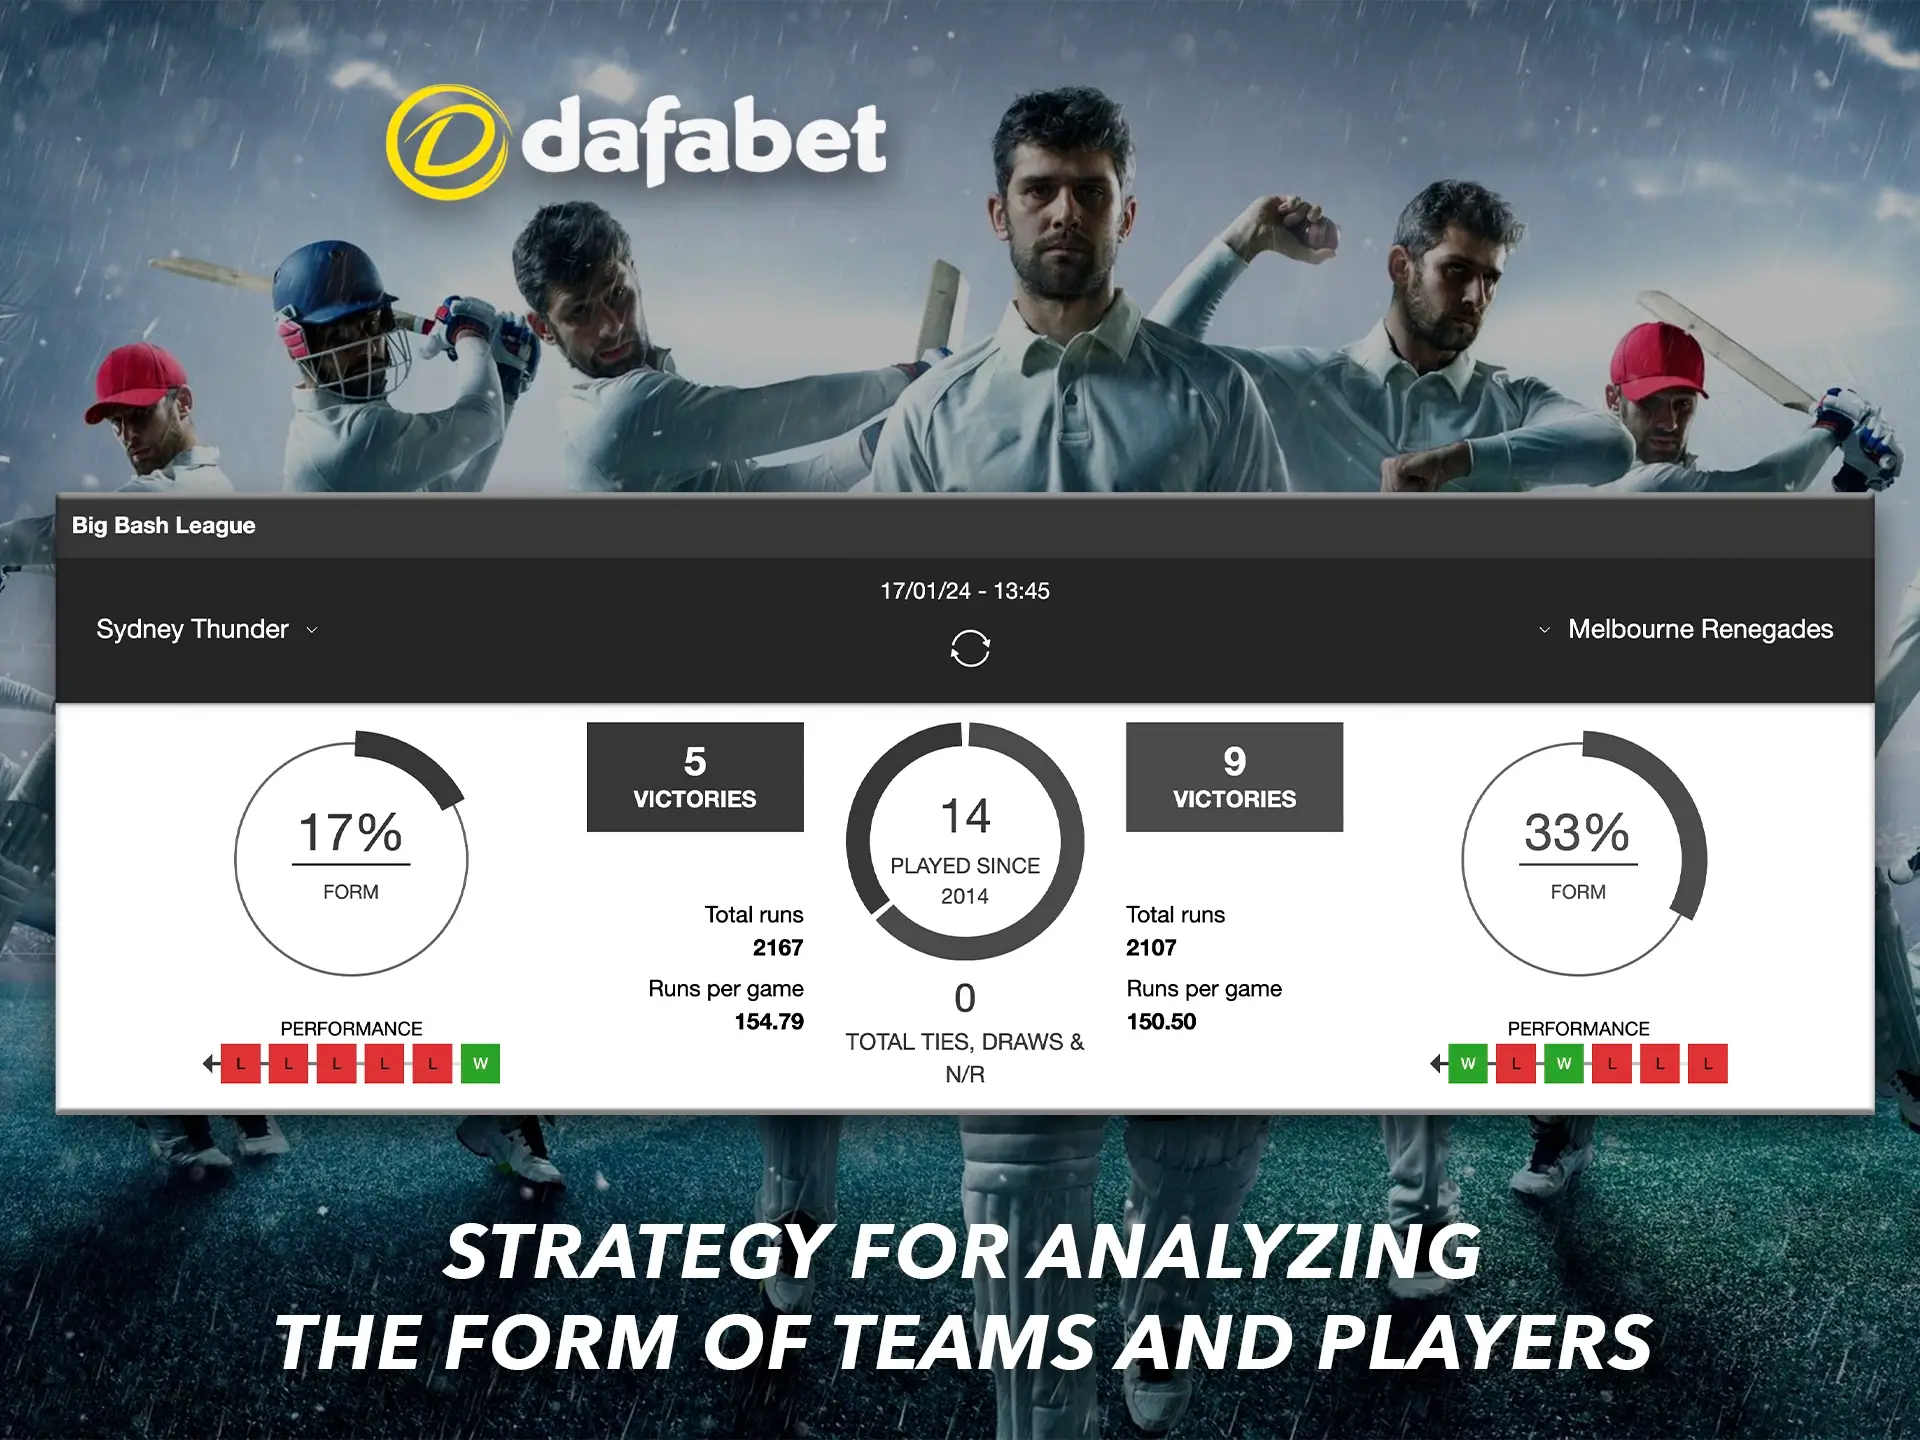 Follow detailed stats of your favourite cricket team on the Dafabet website.